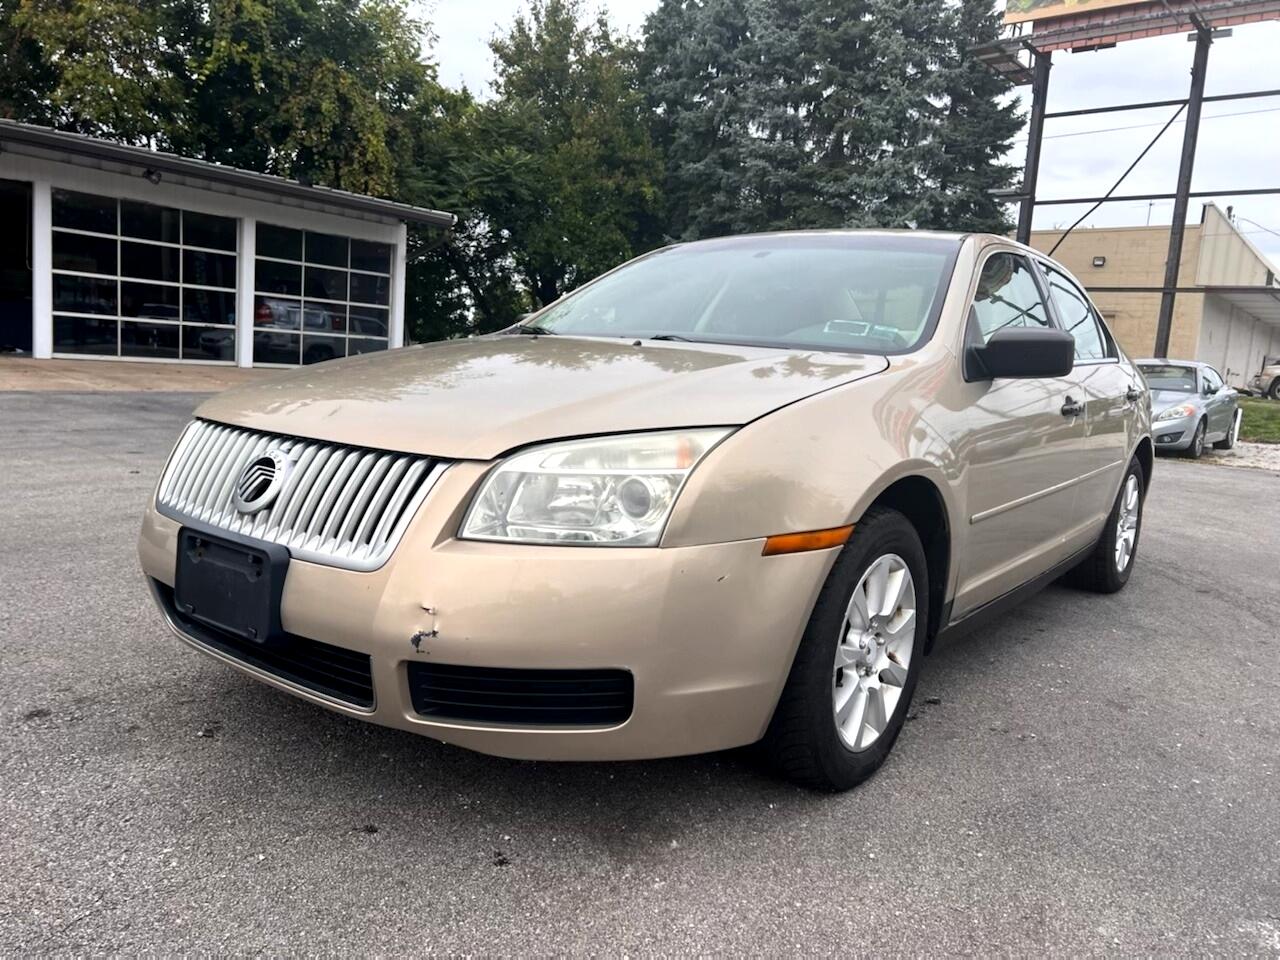 Used 2007 Mercury Milan 4dr Sdn V6 FWD for Sale in Wadsworth OH 44281 Alpha  Auto Group of Wadsworth